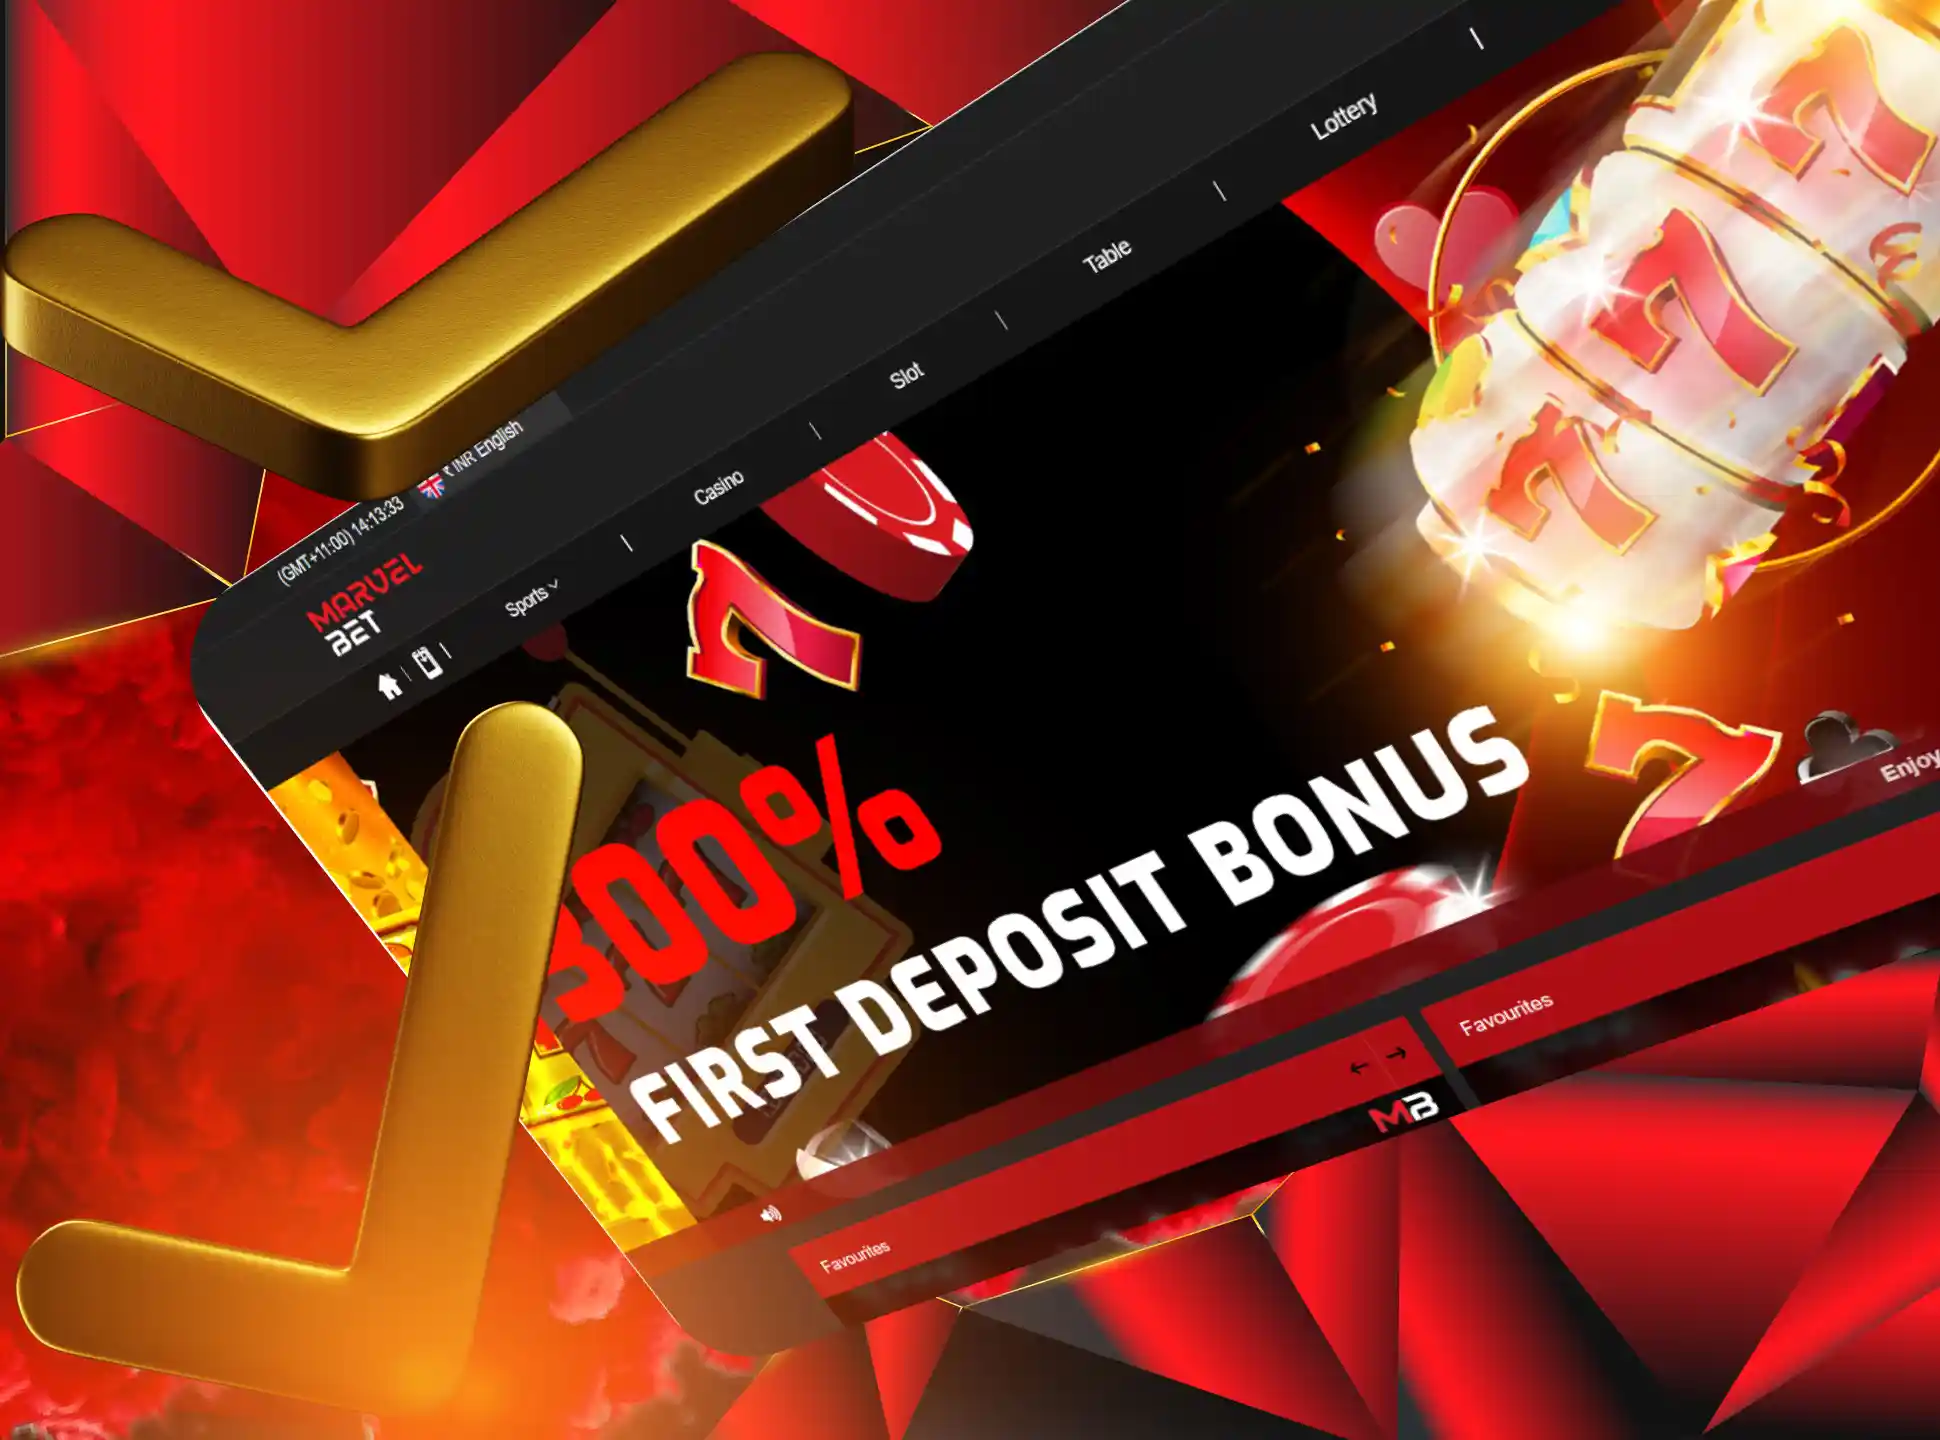 The MarvelBet official website is very easy-to-use and has many useful functions.